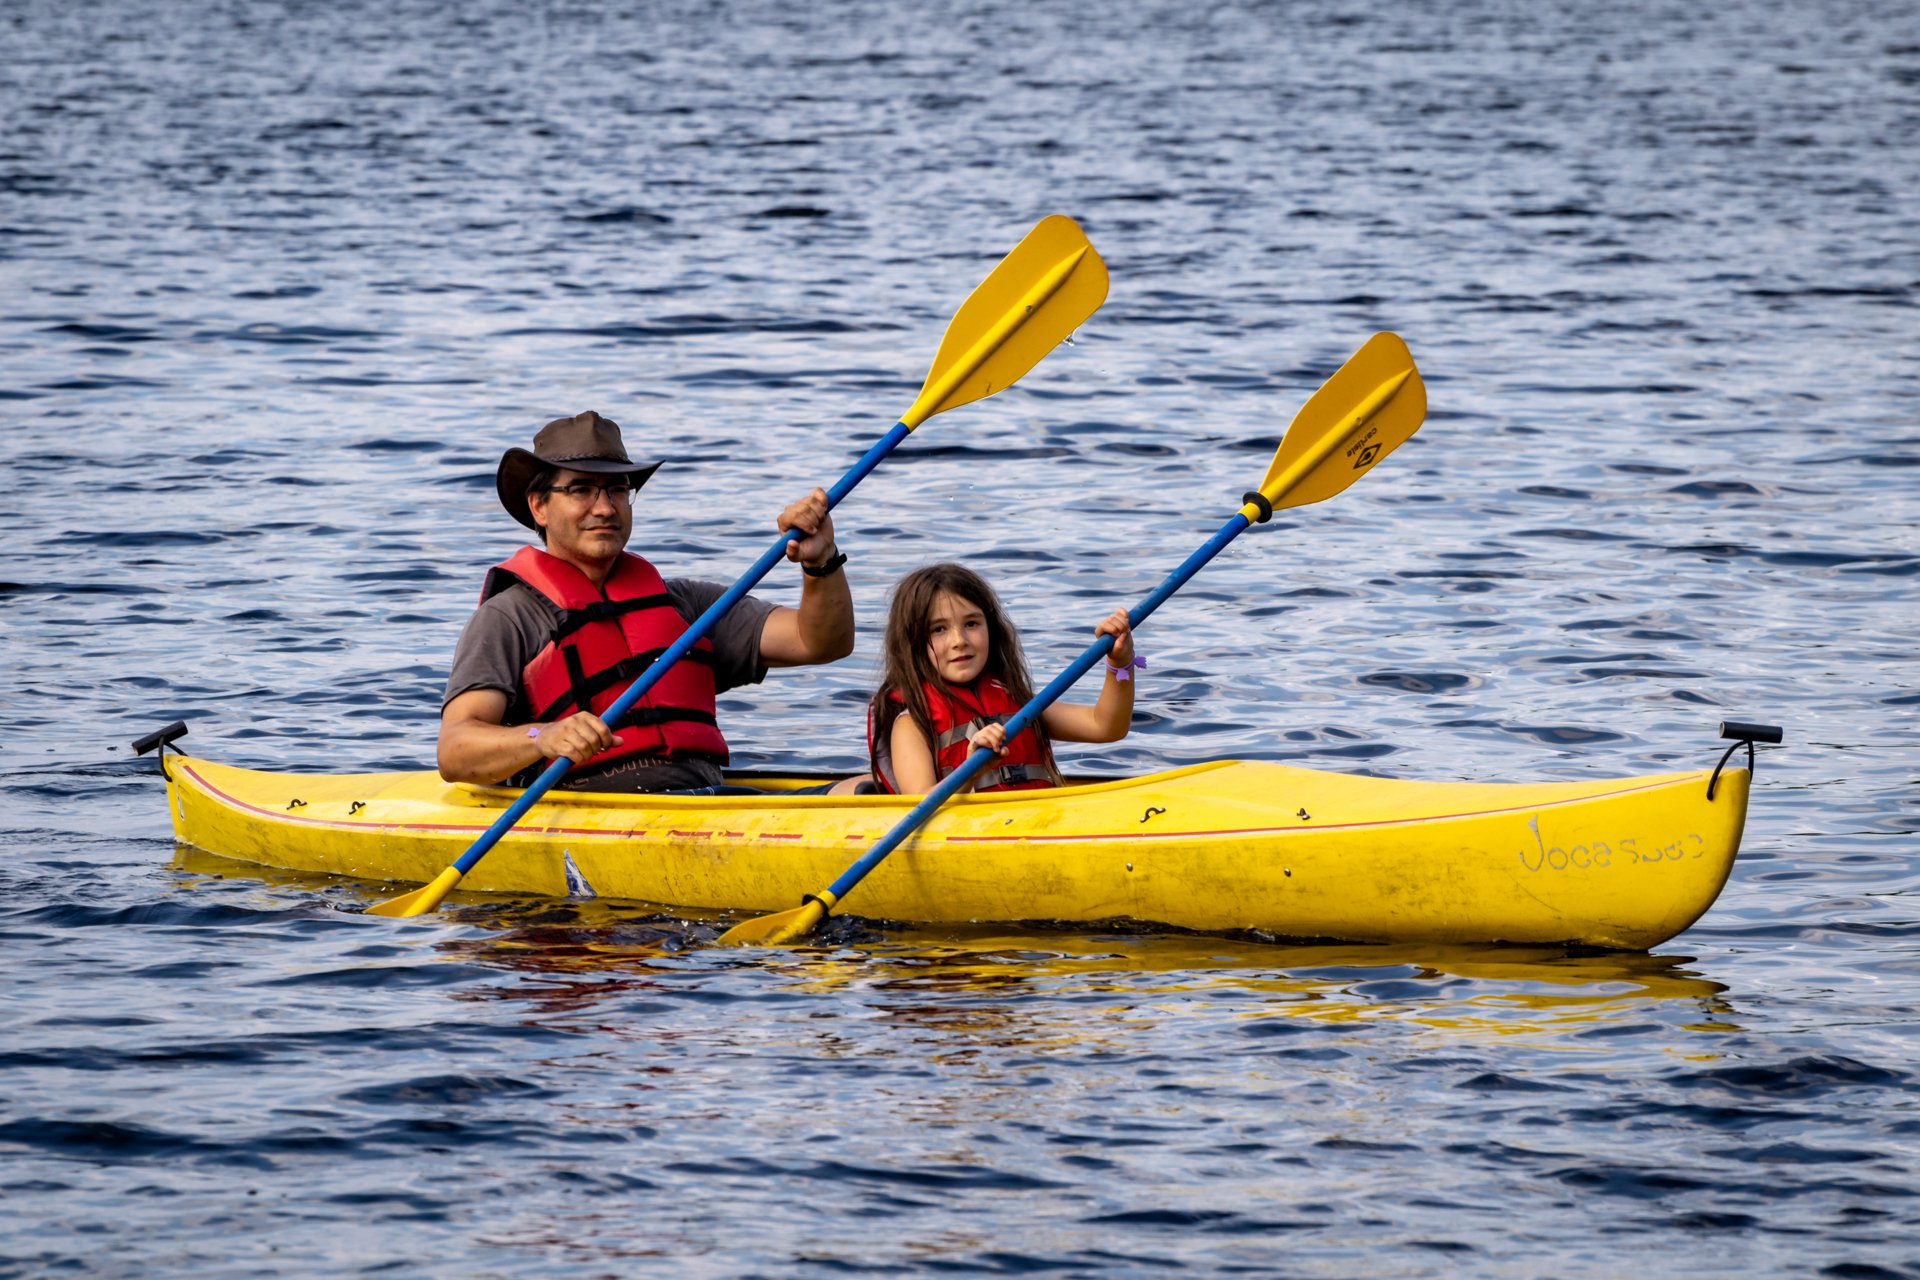 A father and daughter wearing red lifejackets are paddling a yellow, two-person kayak together.